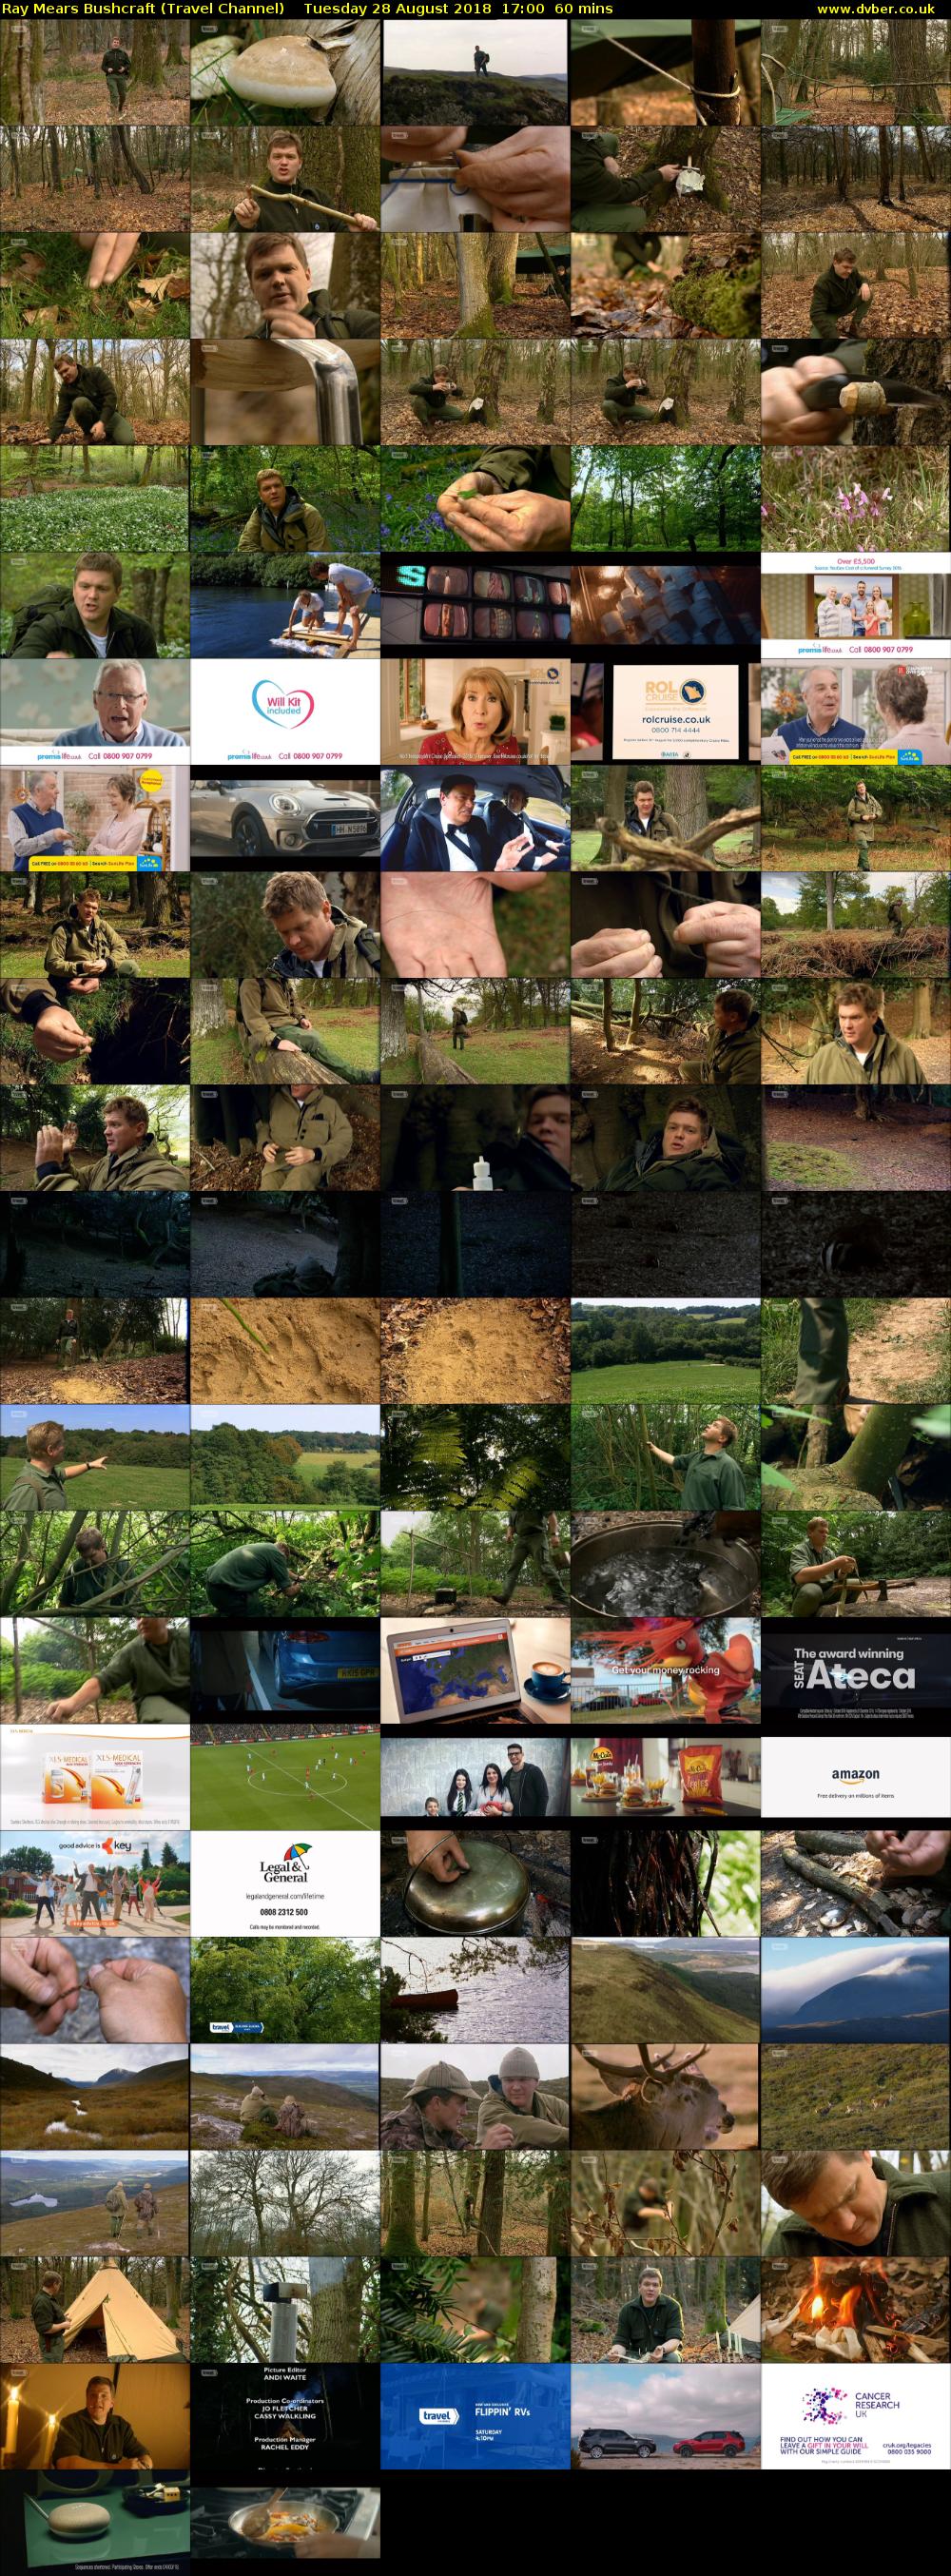 Ray Mears Bushcraft (Travel Channel) Tuesday 28 August 2018 17:00 - 18:00